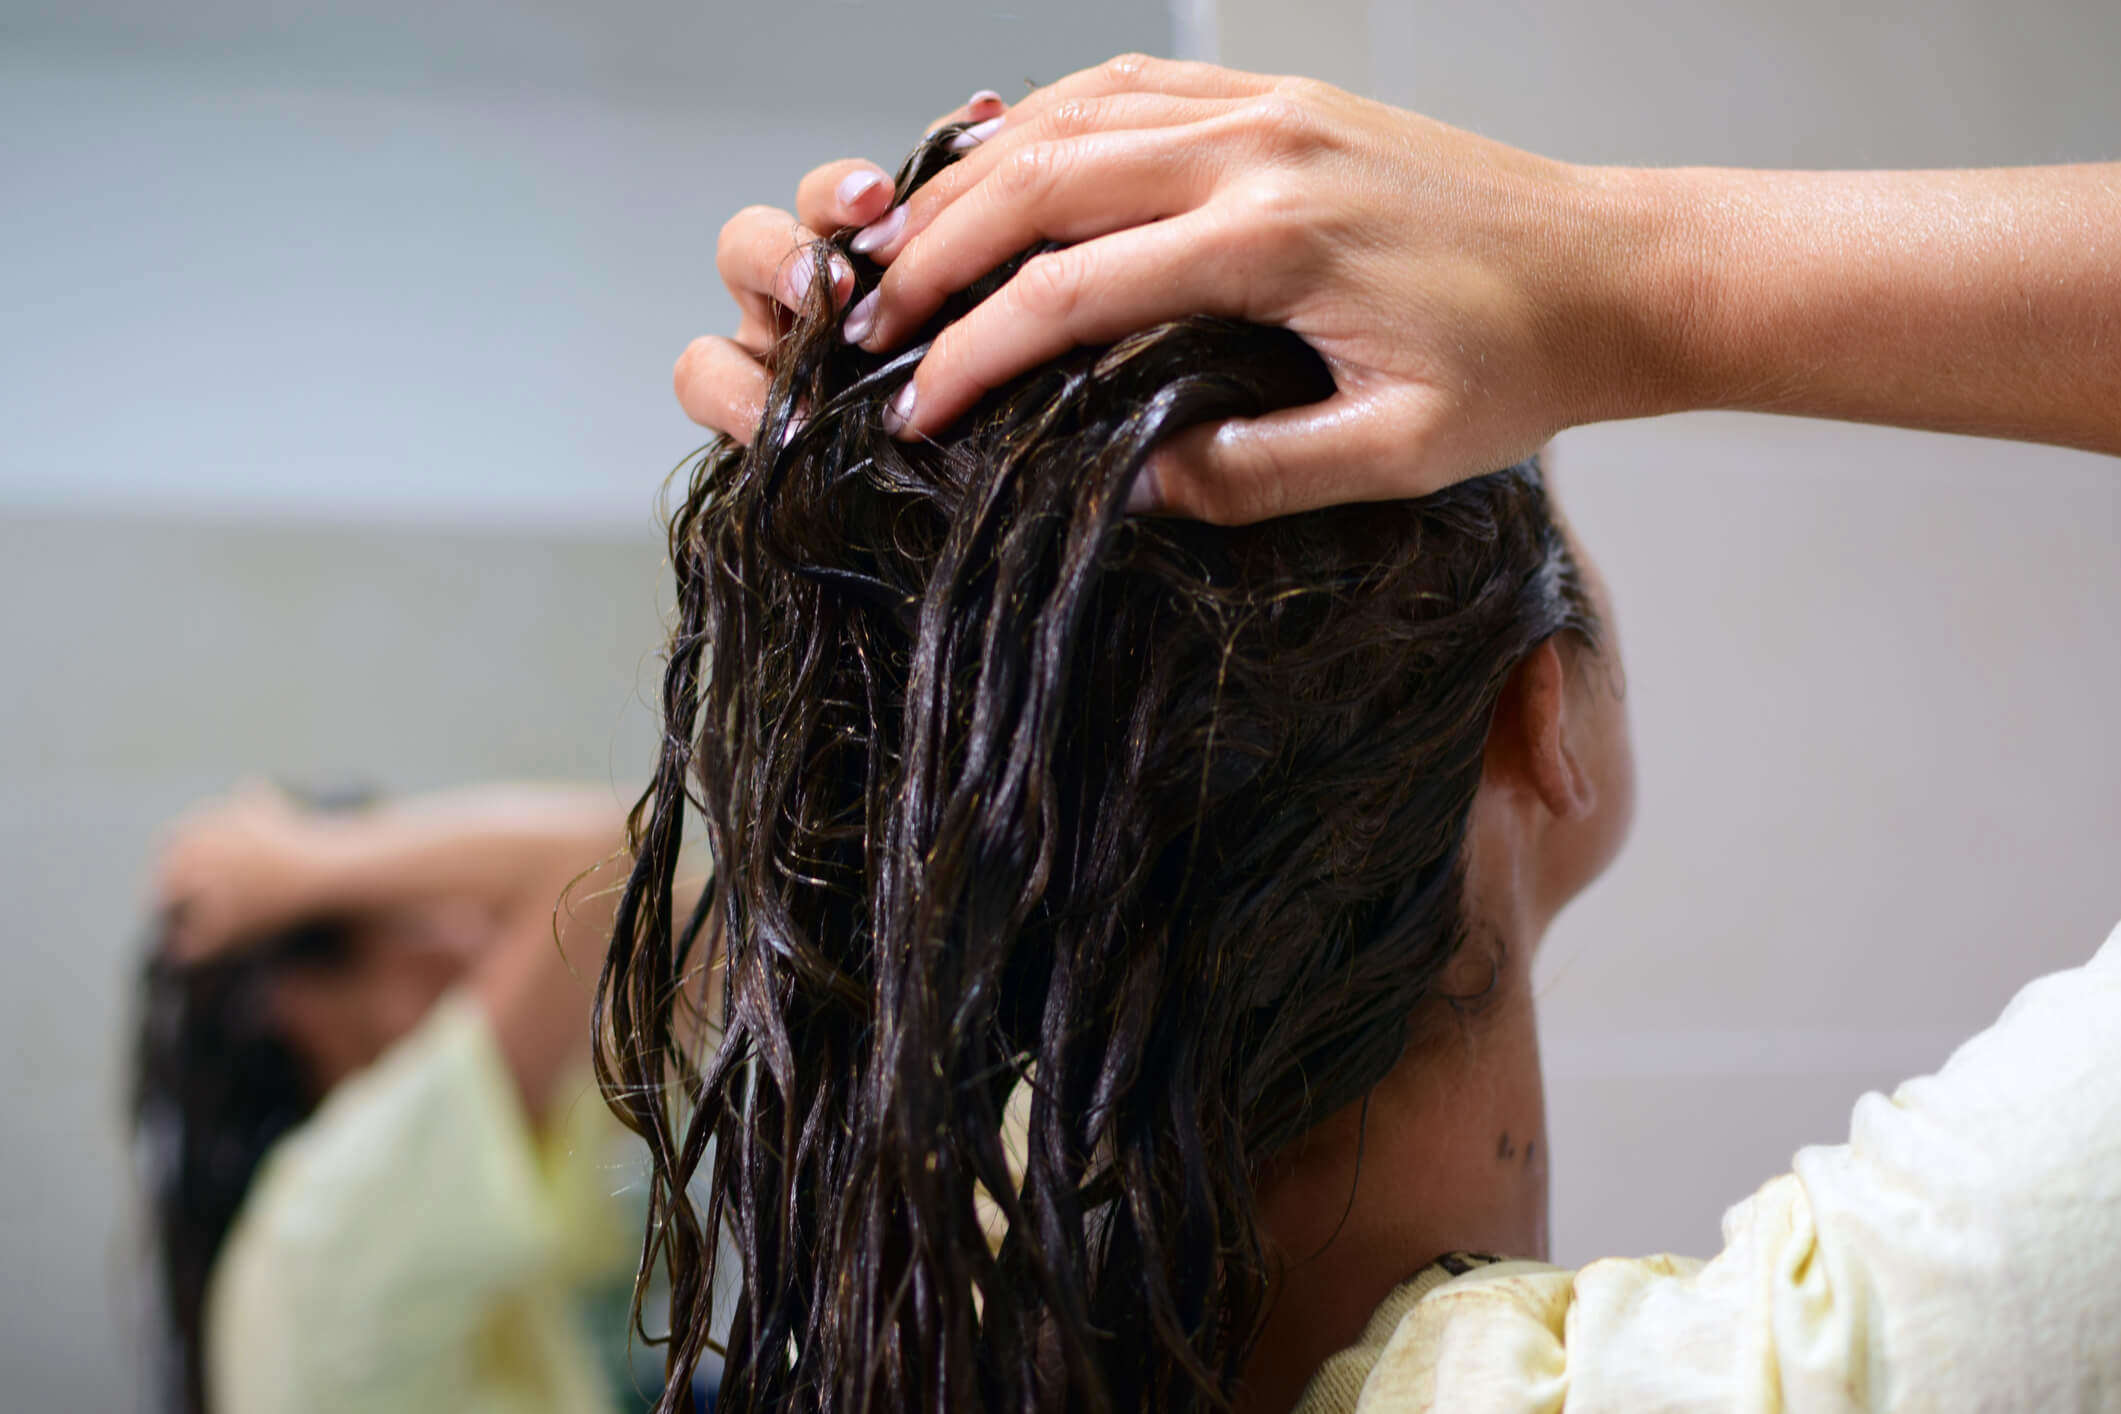 a woman lathering shampoo into her hair